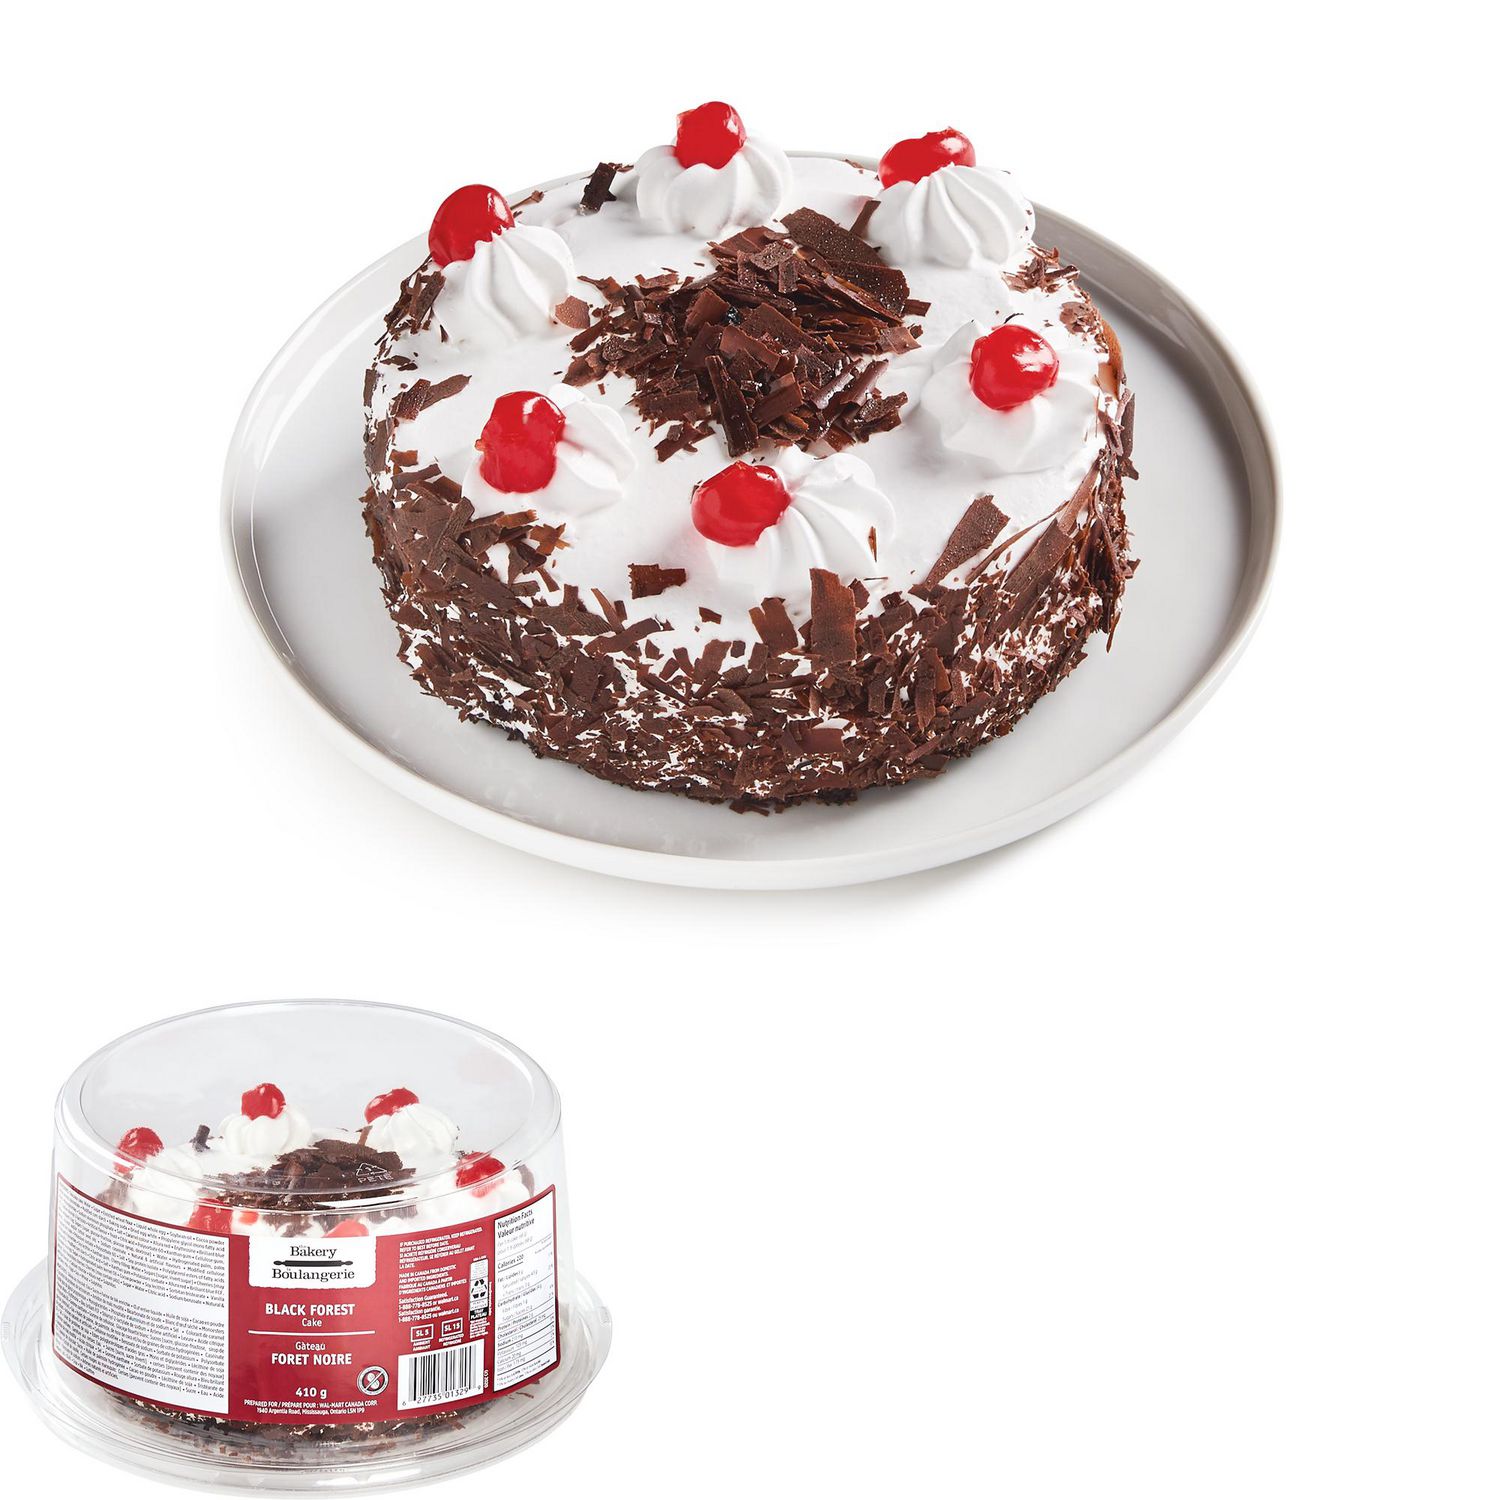 How to Make a German Black Forest Cake